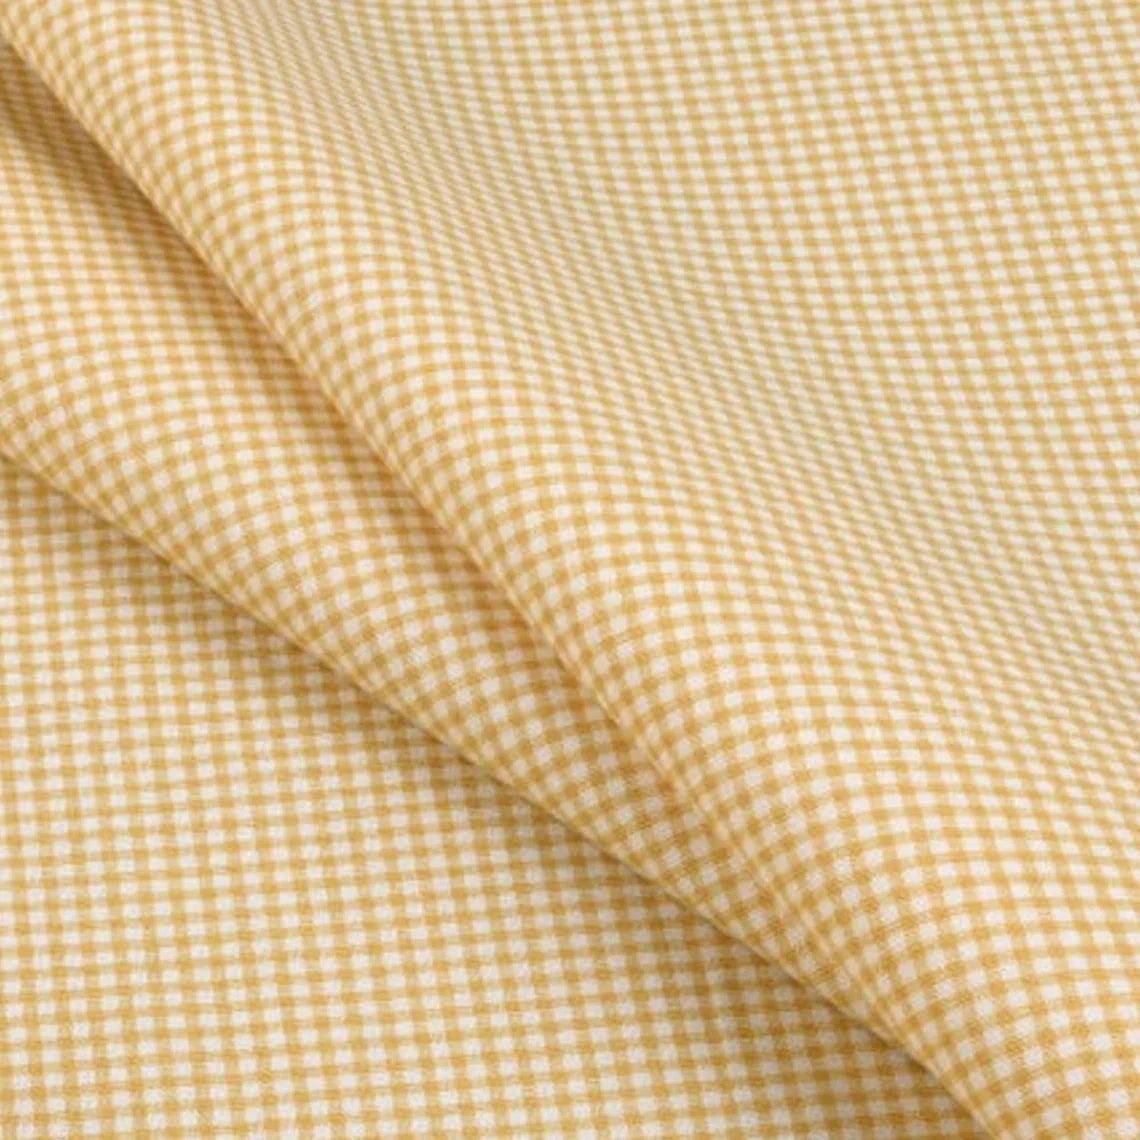 Tailored Crib Skirt in Farmhouse Barley Yellow Gold Gingham Check